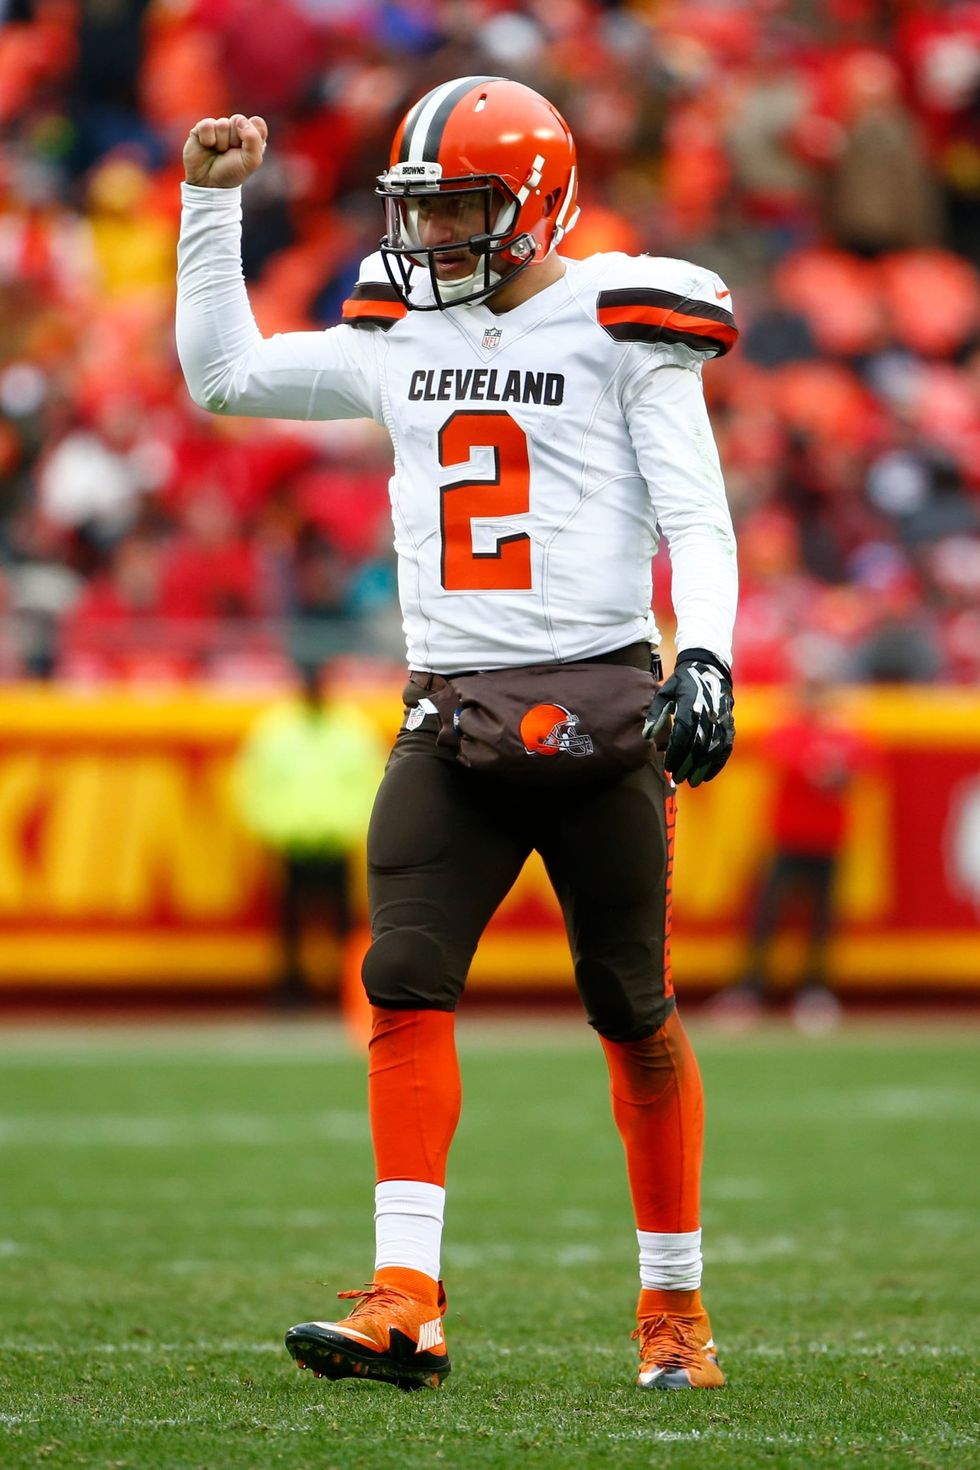 Canadian League clears Johnny Manziel to sign a contract to play football again